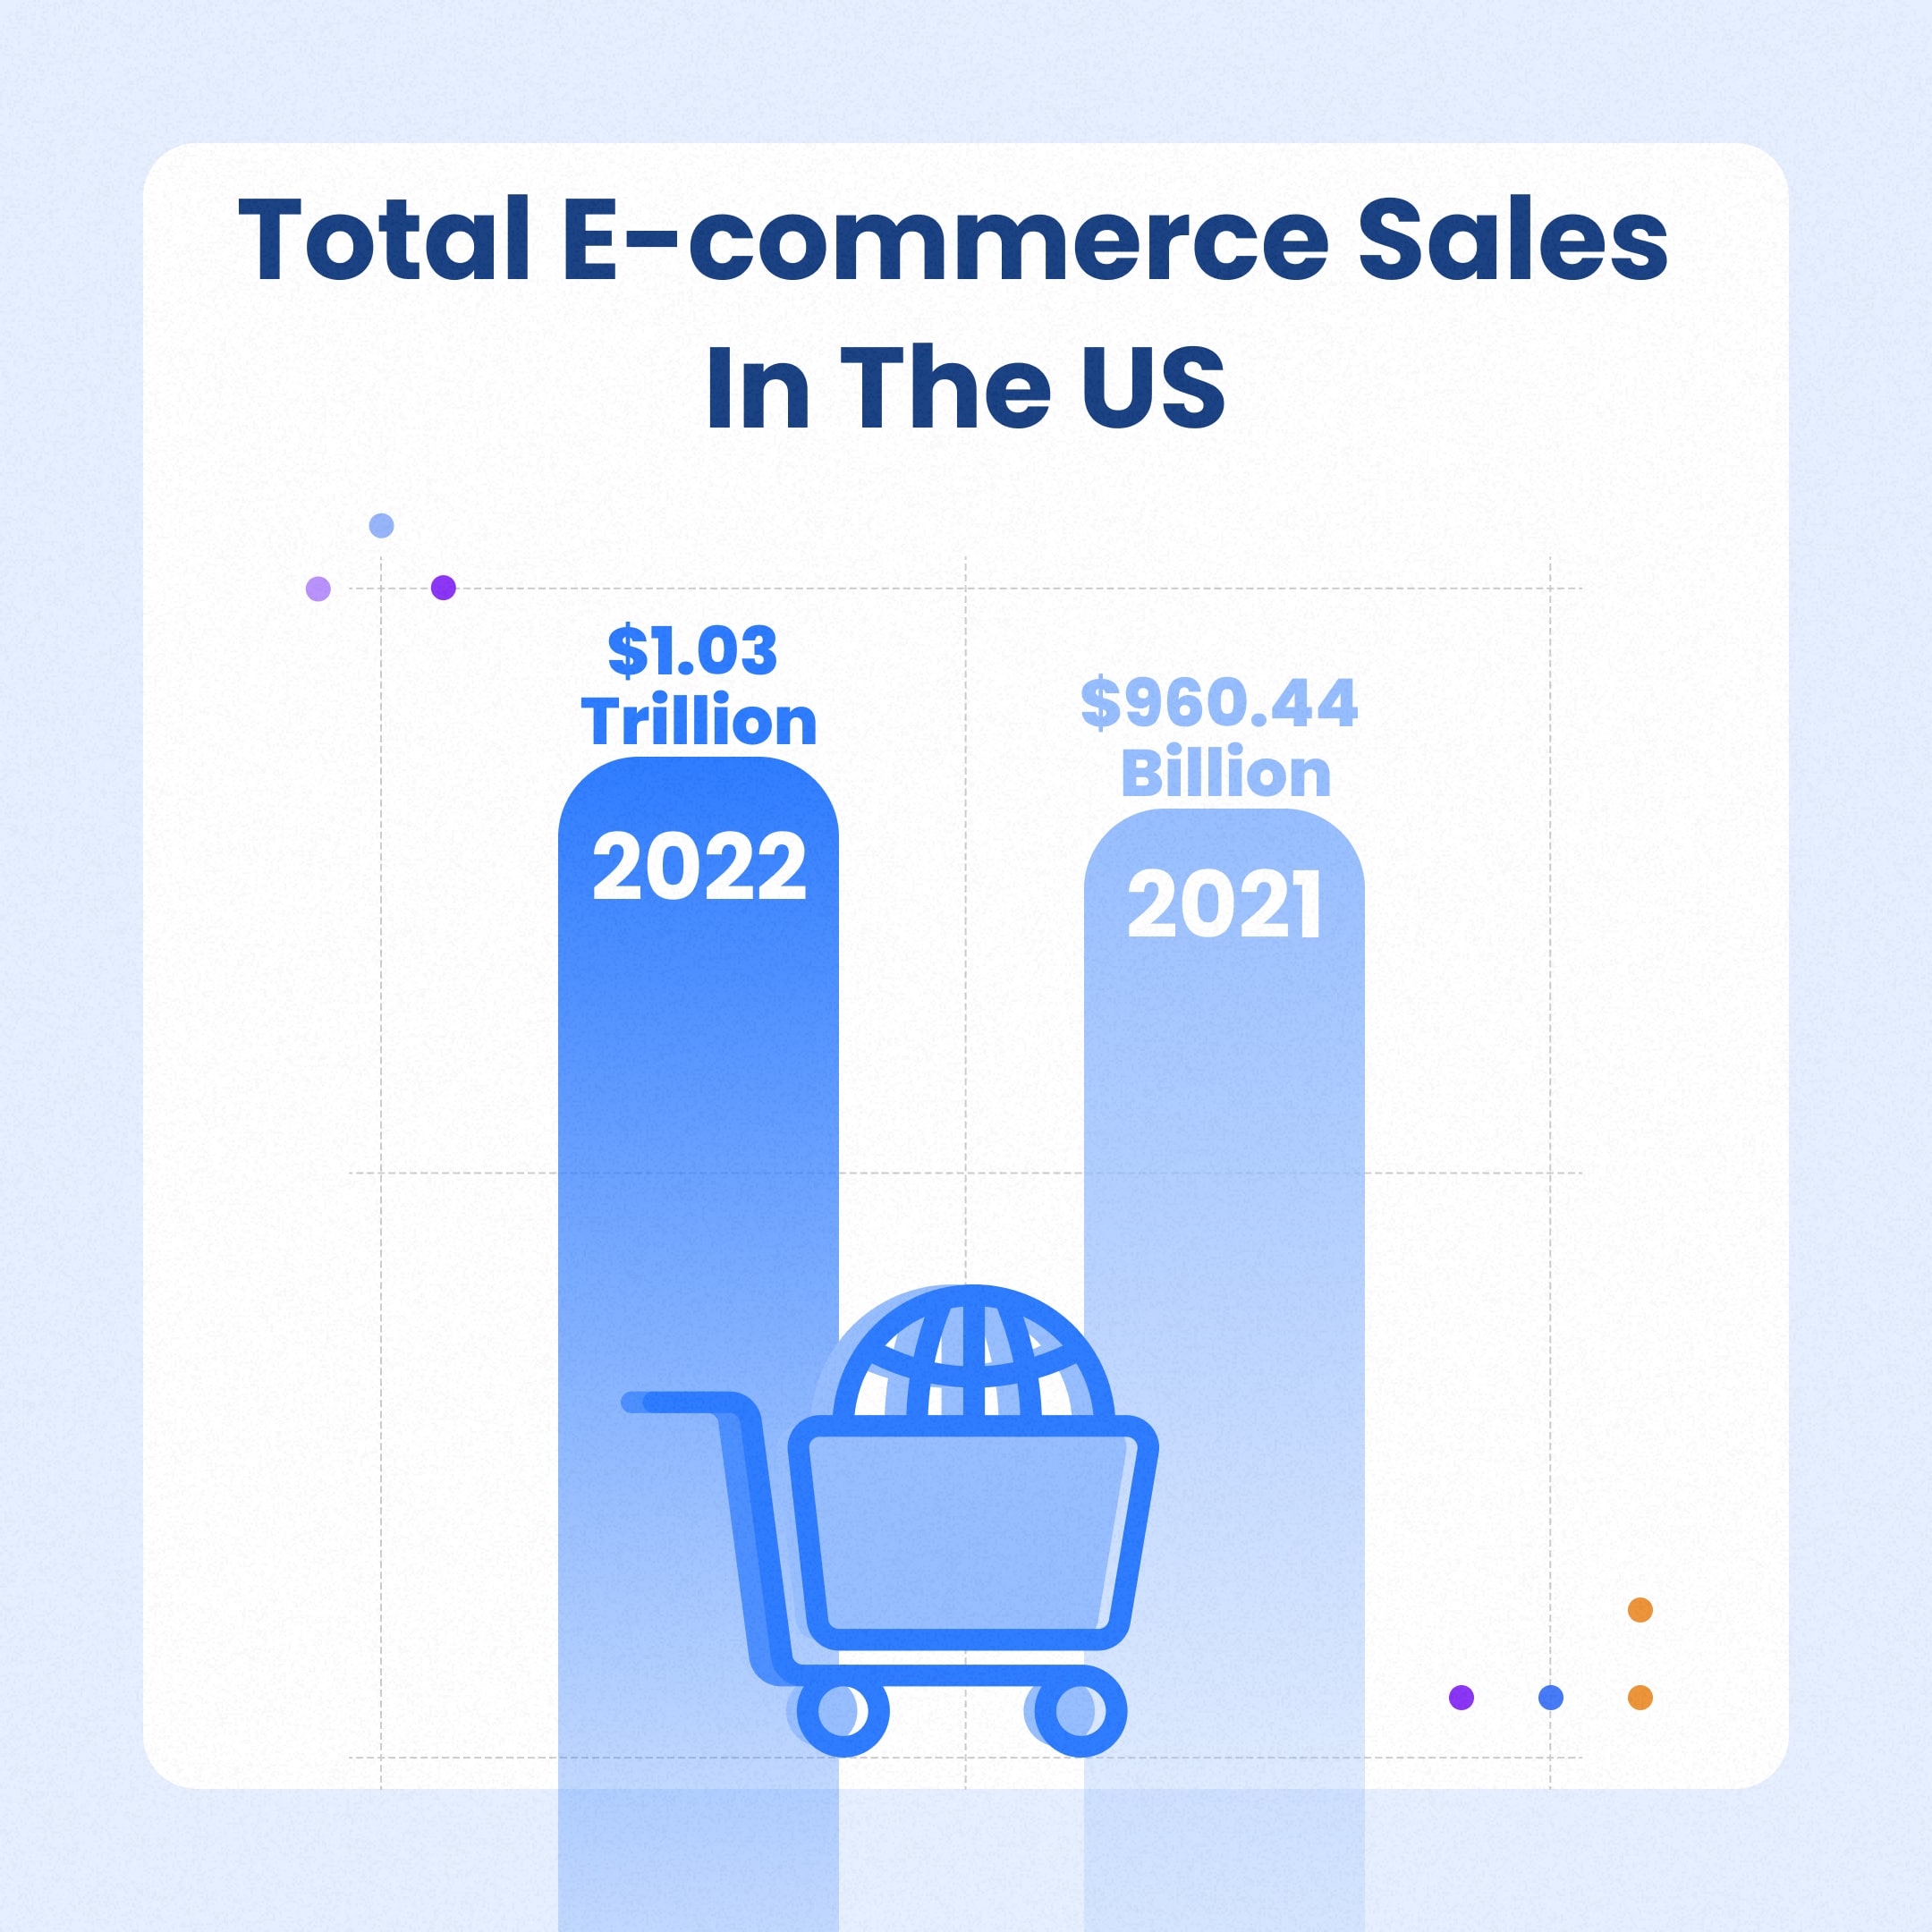 US Department of Commerce figures, e-commerce sales in the US reached $1.03 trillion in 2022. This is the first time that e-commerce revenue has surpassed $1 trillion. It was also significantly higher than the $960.44 billion set for 2021